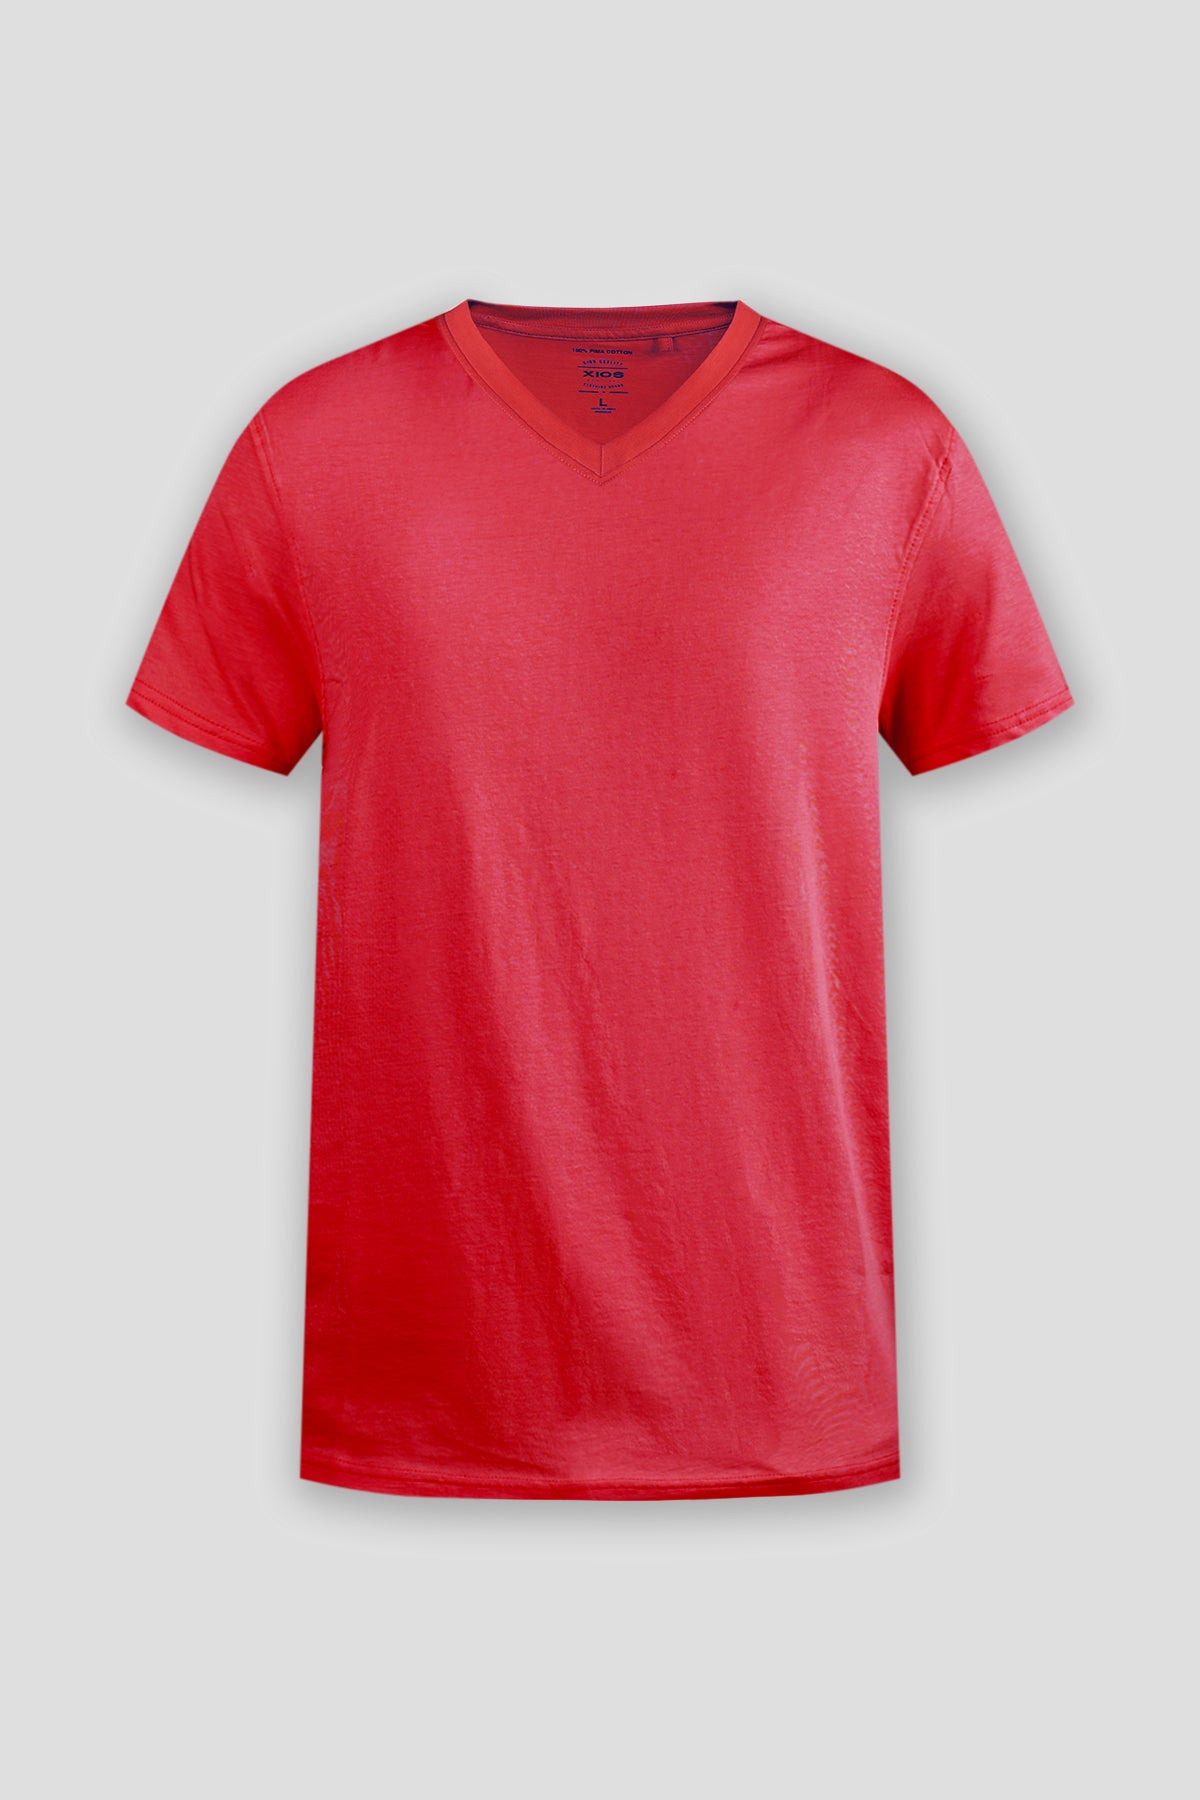 The New Fit Basic Tee (V - Neck) - XIOS America